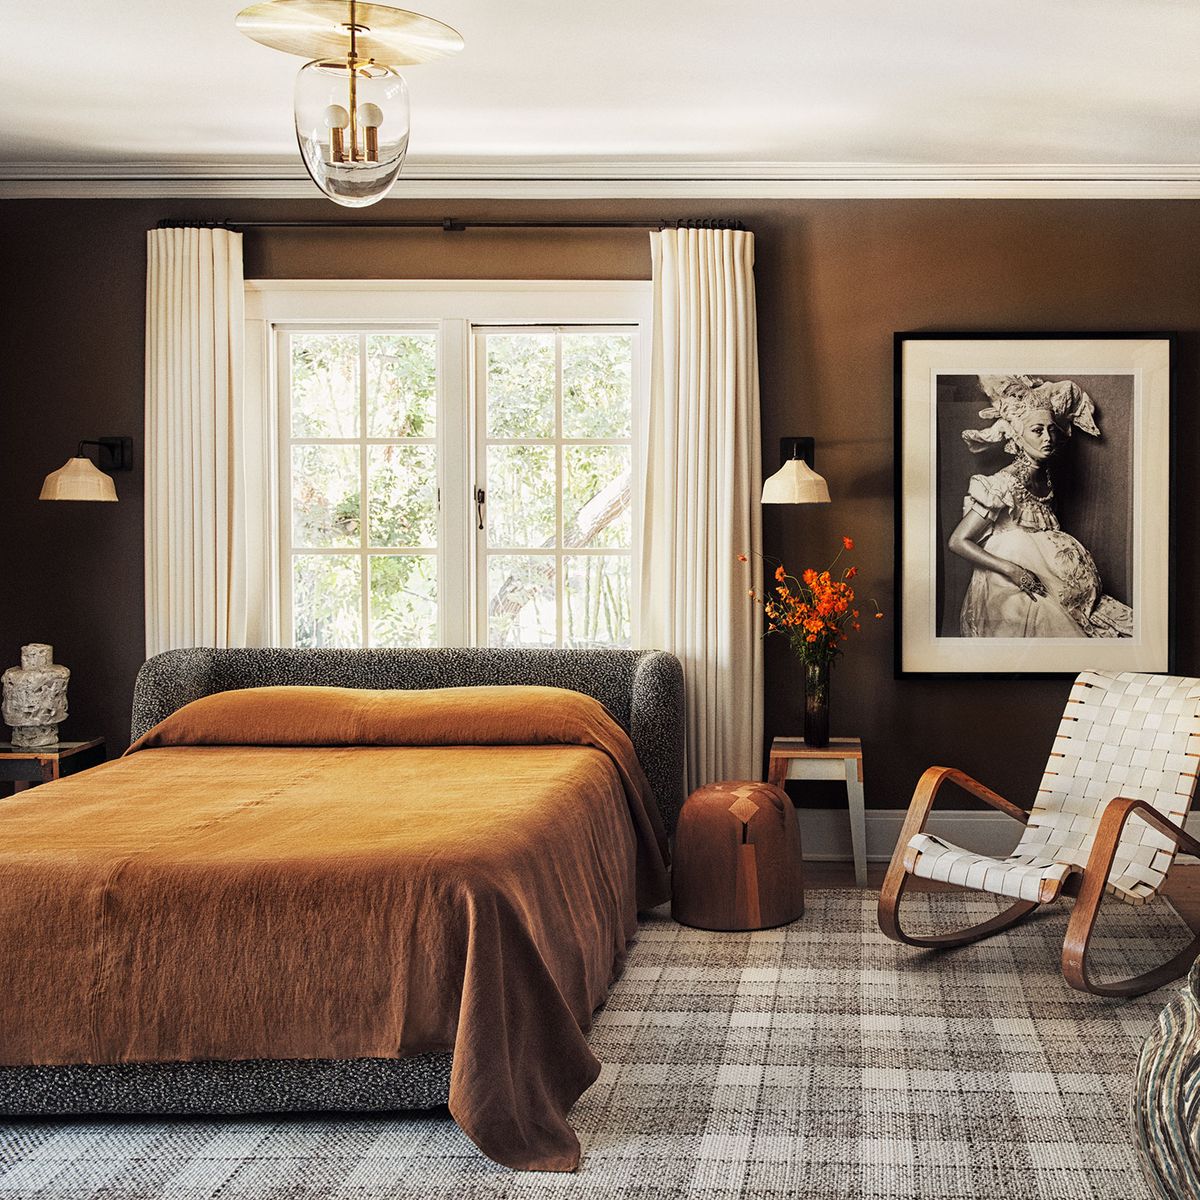 primary bedroom with medium chocolate painted walls and a plaid rug in neutral tones and a slatted rocking chair next to the bed with complementary coverlet in brown on the bed